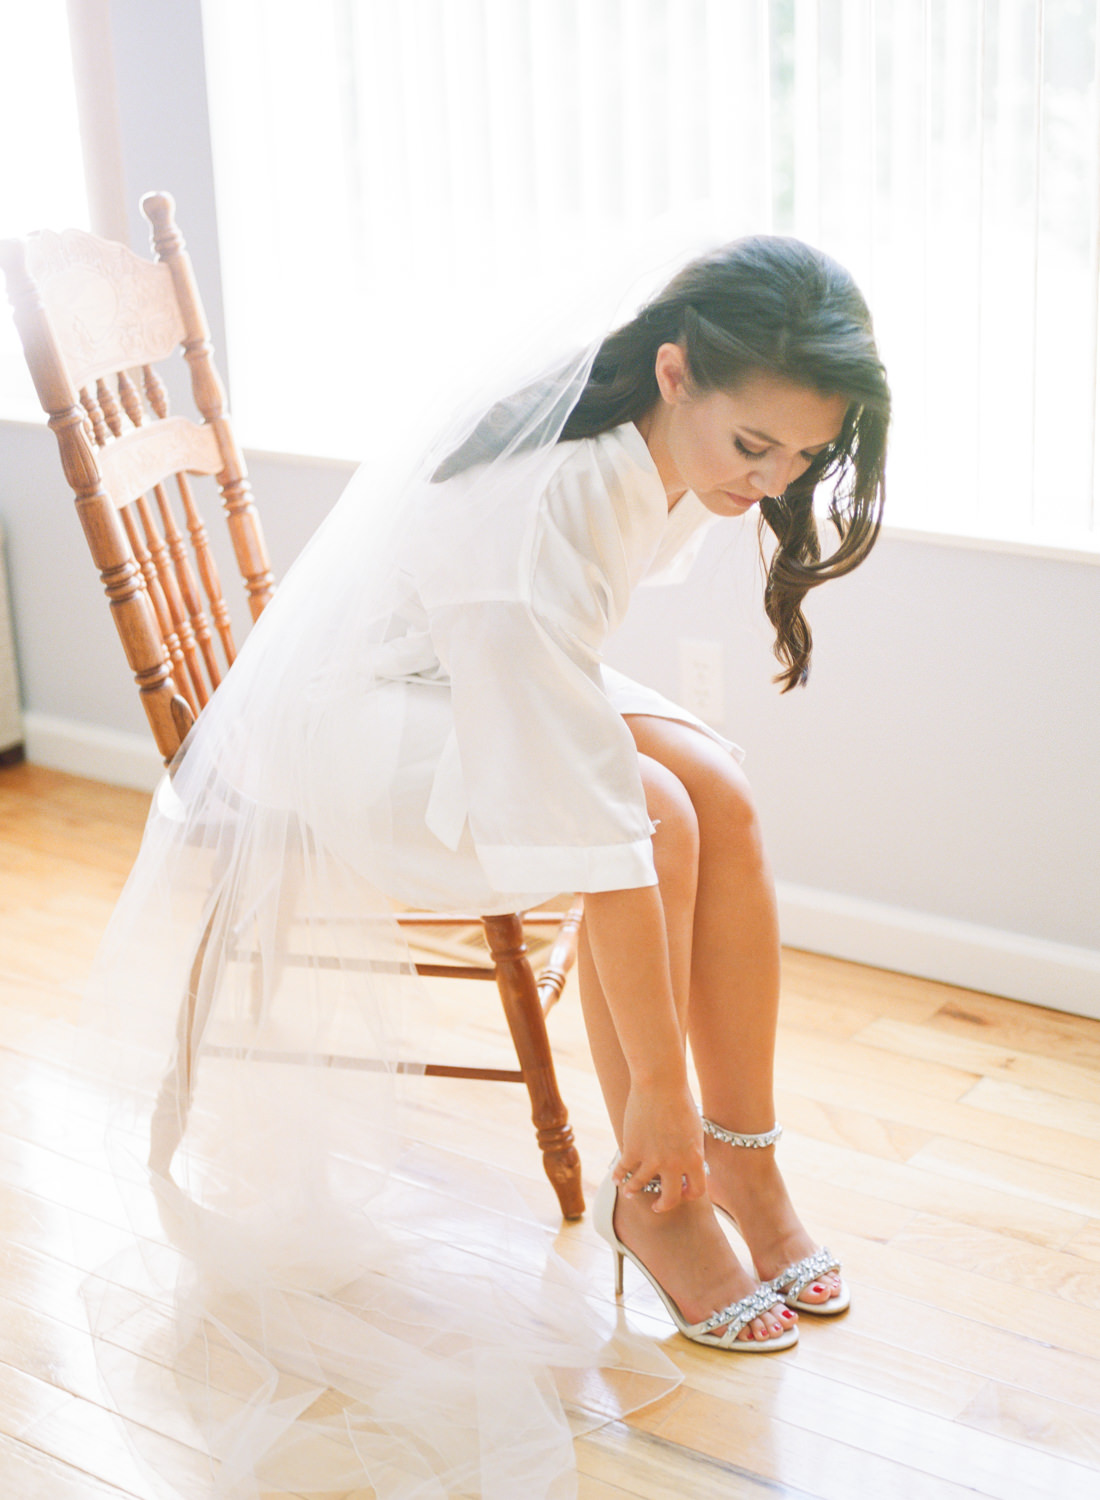 Bride putting on shoes by window; St. Louis film wedding photographer